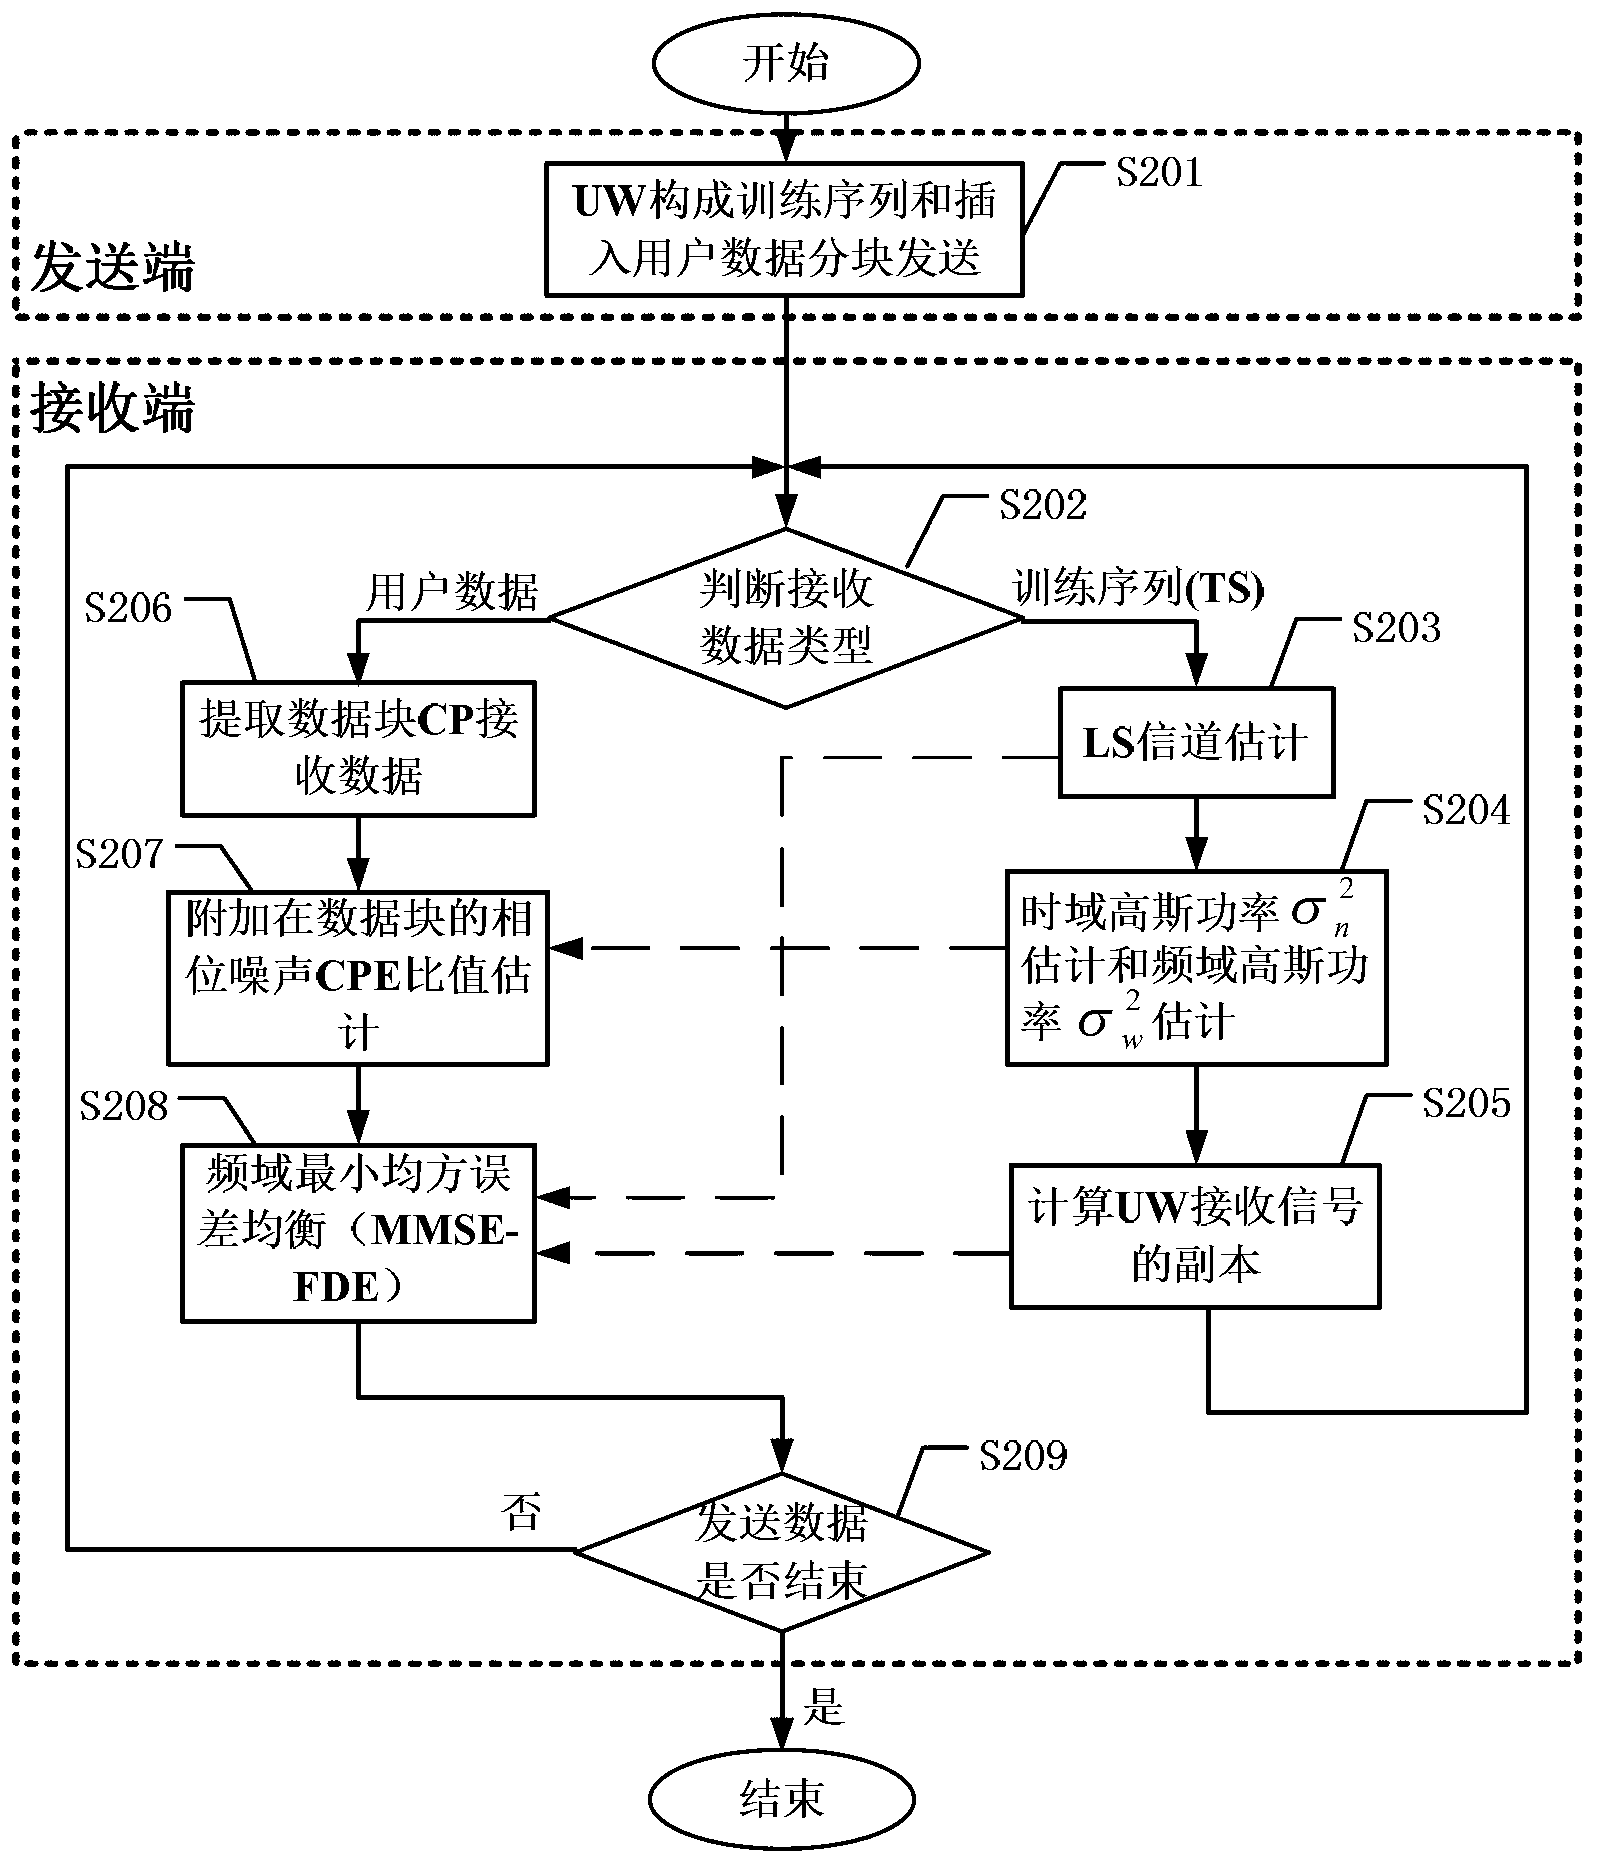 Phase noise suppression method under low-complexity channel estimation of SC-FDE (single carrier-frequency domain equalization) system